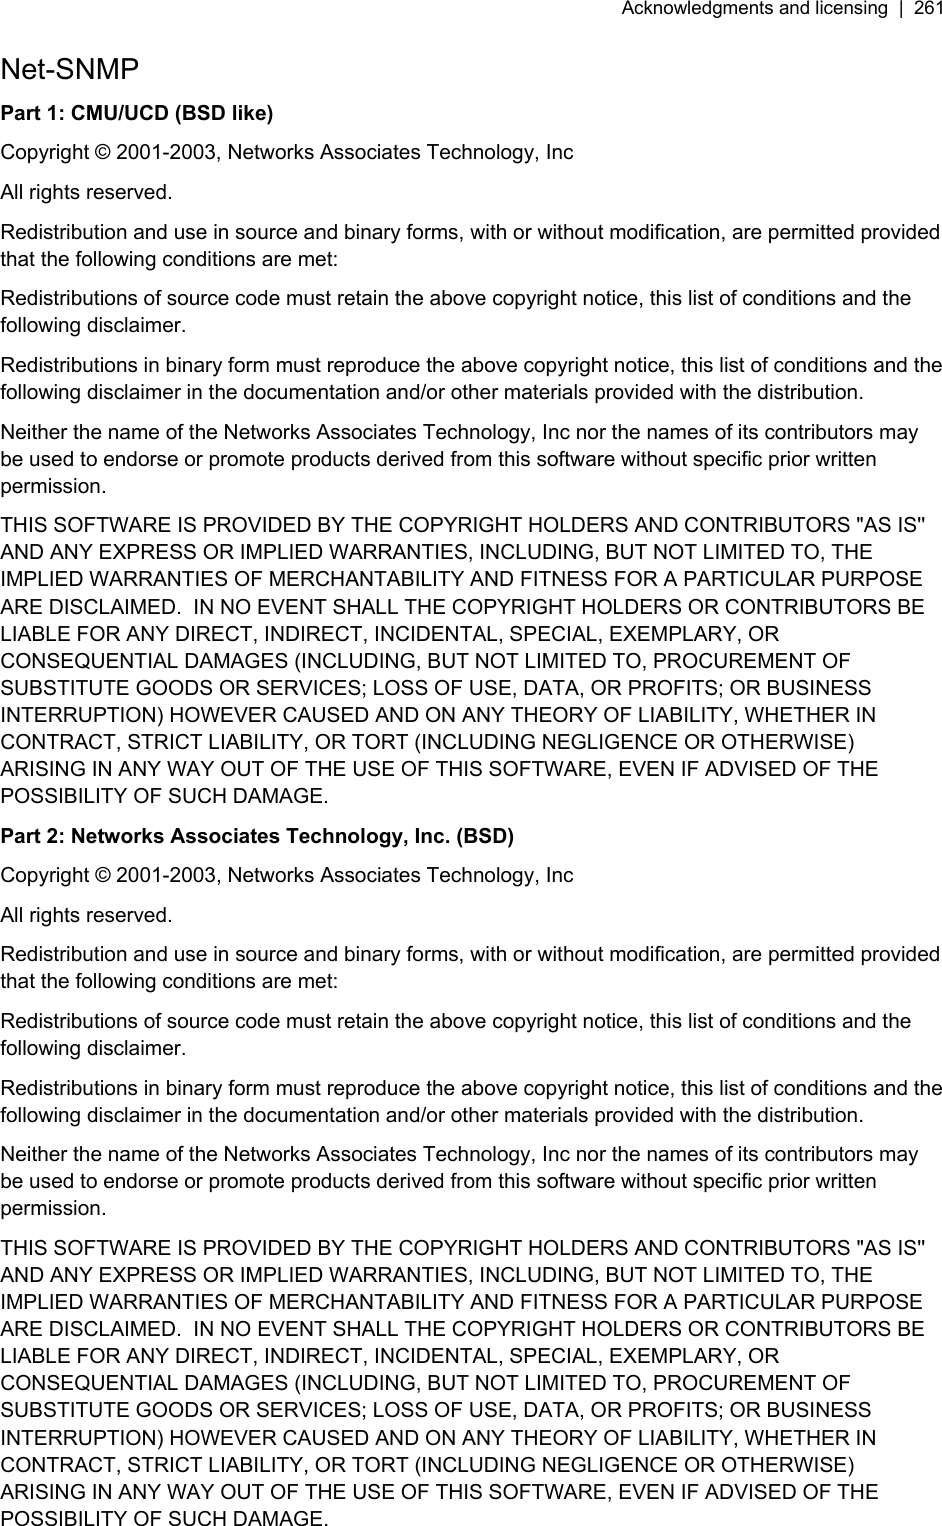 Acknowledgments and licensing  |  261   Net-SNMP Part 1: CMU/UCD (BSD like) Copyright © 2001-2003, Networks Associates Technology, Inc All rights reserved. Redistribution and use in source and binary forms, with or without modification, are permitted provided that the following conditions are met: Redistributions of source code must retain the above copyright notice, this list of conditions and the following disclaimer. Redistributions in binary form must reproduce the above copyright notice, this list of conditions and the following disclaimer in the documentation and/or other materials provided with the distribution. Neither the name of the Networks Associates Technology, Inc nor the names of its contributors may be used to endorse or promote products derived from this software without specific prior written permission. THIS SOFTWARE IS PROVIDED BY THE COPYRIGHT HOLDERS AND CONTRIBUTORS &quot;AS IS&apos;&apos; AND ANY EXPRESS OR IMPLIED WARRANTIES, INCLUDING, BUT NOT LIMITED TO, THE IMPLIED WARRANTIES OF MERCHANTABILITY AND FITNESS FOR A PARTICULAR PURPOSE ARE DISCLAIMED.  IN NO EVENT SHALL THE COPYRIGHT HOLDERS OR CONTRIBUTORS BE LIABLE FOR ANY DIRECT, INDIRECT, INCIDENTAL, SPECIAL, EXEMPLARY, OR CONSEQUENTIAL DAMAGES (INCLUDING, BUT NOT LIMITED TO, PROCUREMENT OF SUBSTITUTE GOODS OR SERVICES; LOSS OF USE, DATA, OR PROFITS; OR BUSINESS INTERRUPTION) HOWEVER CAUSED AND ON ANY THEORY OF LIABILITY, WHETHER IN CONTRACT, STRICT LIABILITY, OR TORT (INCLUDING NEGLIGENCE OR OTHERWISE) ARISING IN ANY WAY OUT OF THE USE OF THIS SOFTWARE, EVEN IF ADVISED OF THE POSSIBILITY OF SUCH DAMAGE. Part 2: Networks Associates Technology, Inc. (BSD) Copyright © 2001-2003, Networks Associates Technology, Inc All rights reserved. Redistribution and use in source and binary forms, with or without modification, are permitted provided that the following conditions are met: Redistributions of source code must retain the above copyright notice, this list of conditions and the following disclaimer. Redistributions in binary form must reproduce the above copyright notice, this list of conditions and the following disclaimer in the documentation and/or other materials provided with the distribution. Neither the name of the Networks Associates Technology, Inc nor the names of its contributors may be used to endorse or promote products derived from this software without specific prior written permission. THIS SOFTWARE IS PROVIDED BY THE COPYRIGHT HOLDERS AND CONTRIBUTORS &quot;AS IS&apos;&apos; AND ANY EXPRESS OR IMPLIED WARRANTIES, INCLUDING, BUT NOT LIMITED TO, THE IMPLIED WARRANTIES OF MERCHANTABILITY AND FITNESS FOR A PARTICULAR PURPOSE ARE DISCLAIMED.  IN NO EVENT SHALL THE COPYRIGHT HOLDERS OR CONTRIBUTORS BE LIABLE FOR ANY DIRECT, INDIRECT, INCIDENTAL, SPECIAL, EXEMPLARY, OR CONSEQUENTIAL DAMAGES (INCLUDING, BUT NOT LIMITED TO, PROCUREMENT OF SUBSTITUTE GOODS OR SERVICES; LOSS OF USE, DATA, OR PROFITS; OR BUSINESS INTERRUPTION) HOWEVER CAUSED AND ON ANY THEORY OF LIABILITY, WHETHER IN CONTRACT, STRICT LIABILITY, OR TORT (INCLUDING NEGLIGENCE OR OTHERWISE) ARISING IN ANY WAY OUT OF THE USE OF THIS SOFTWARE, EVEN IF ADVISED OF THE POSSIBILITY OF SUCH DAMAGE. 